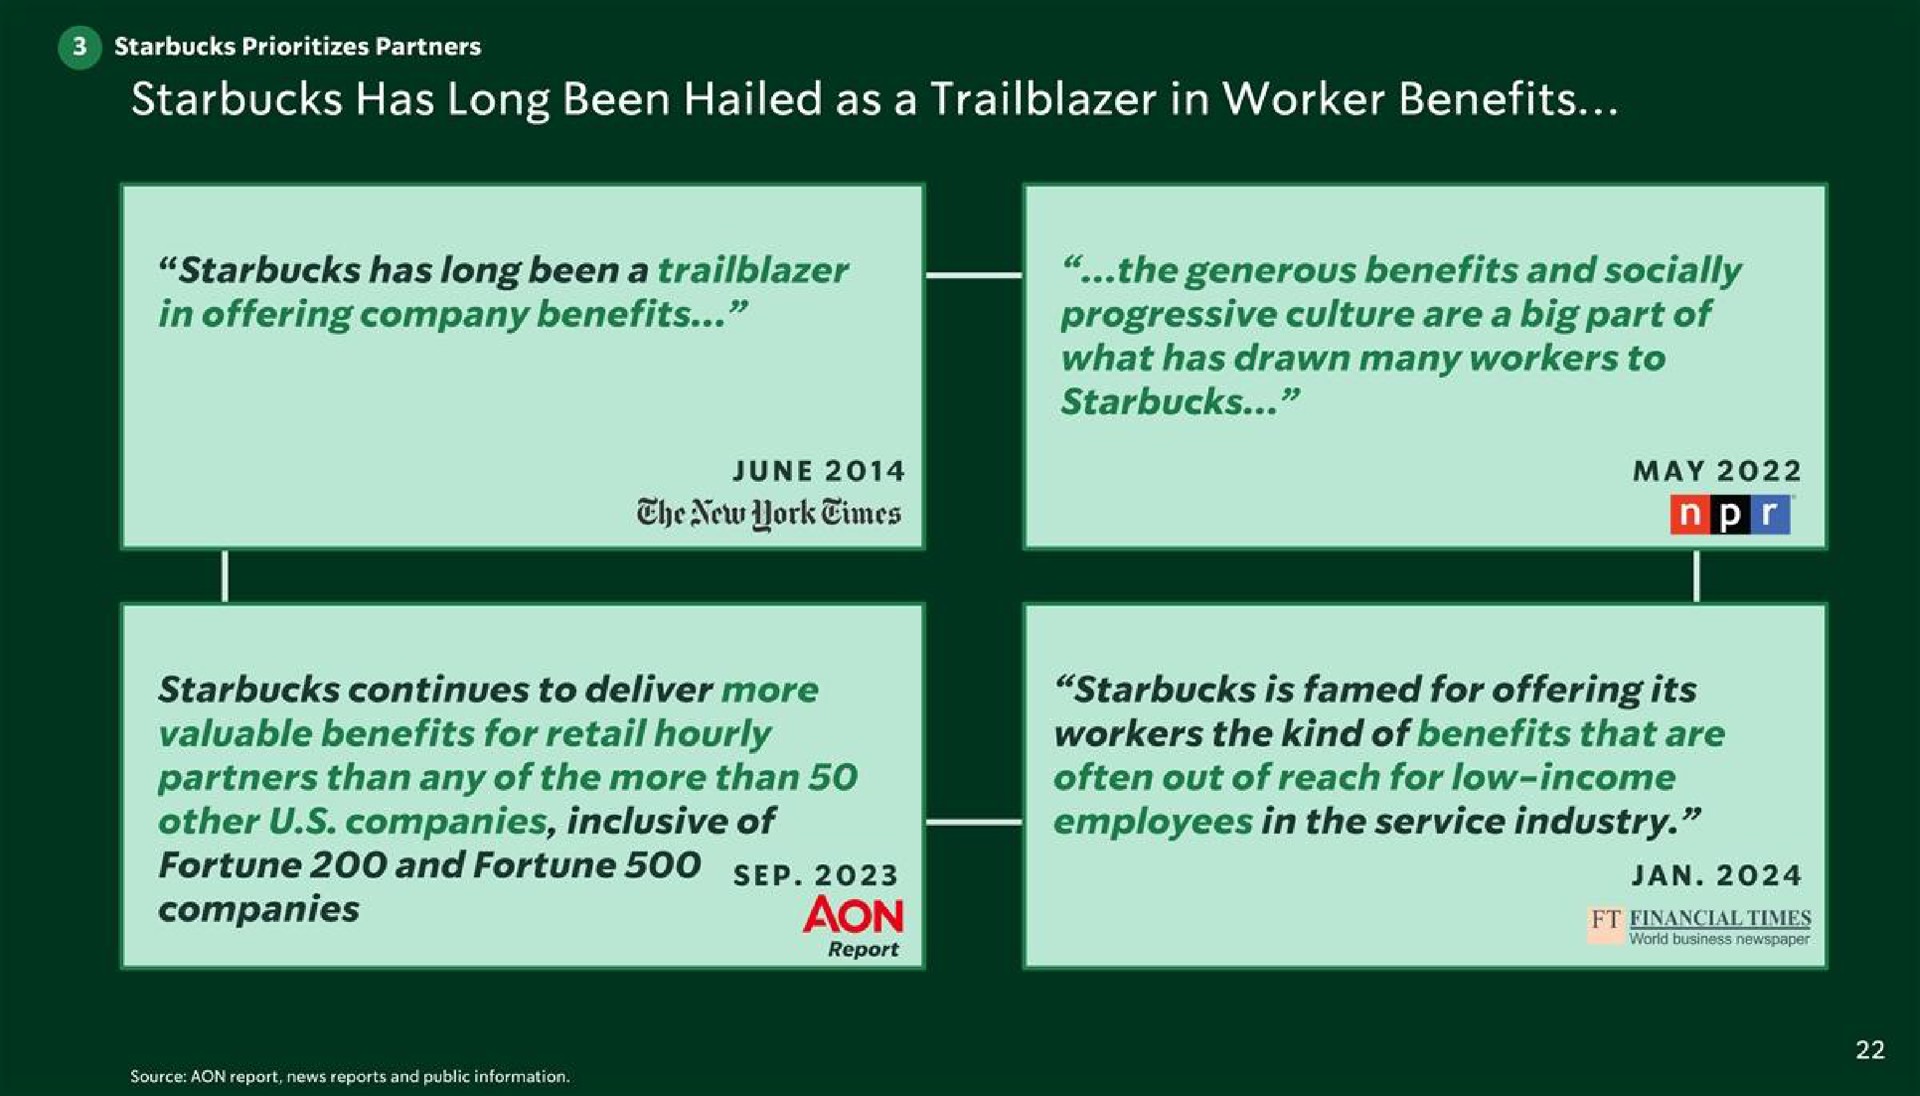 has long been hailed as a in worker benefits has long been a in offering company benefits che new york the generous benefits and socially progressive culture are a big part of what has drawn many workers to continues to deliver more valuable benefits for retail hourly partners than any of the more than other companies inclusive of companies is for offering its workers the kind of benefits that are often out of reach for low income employees in the service industry | Starbucks